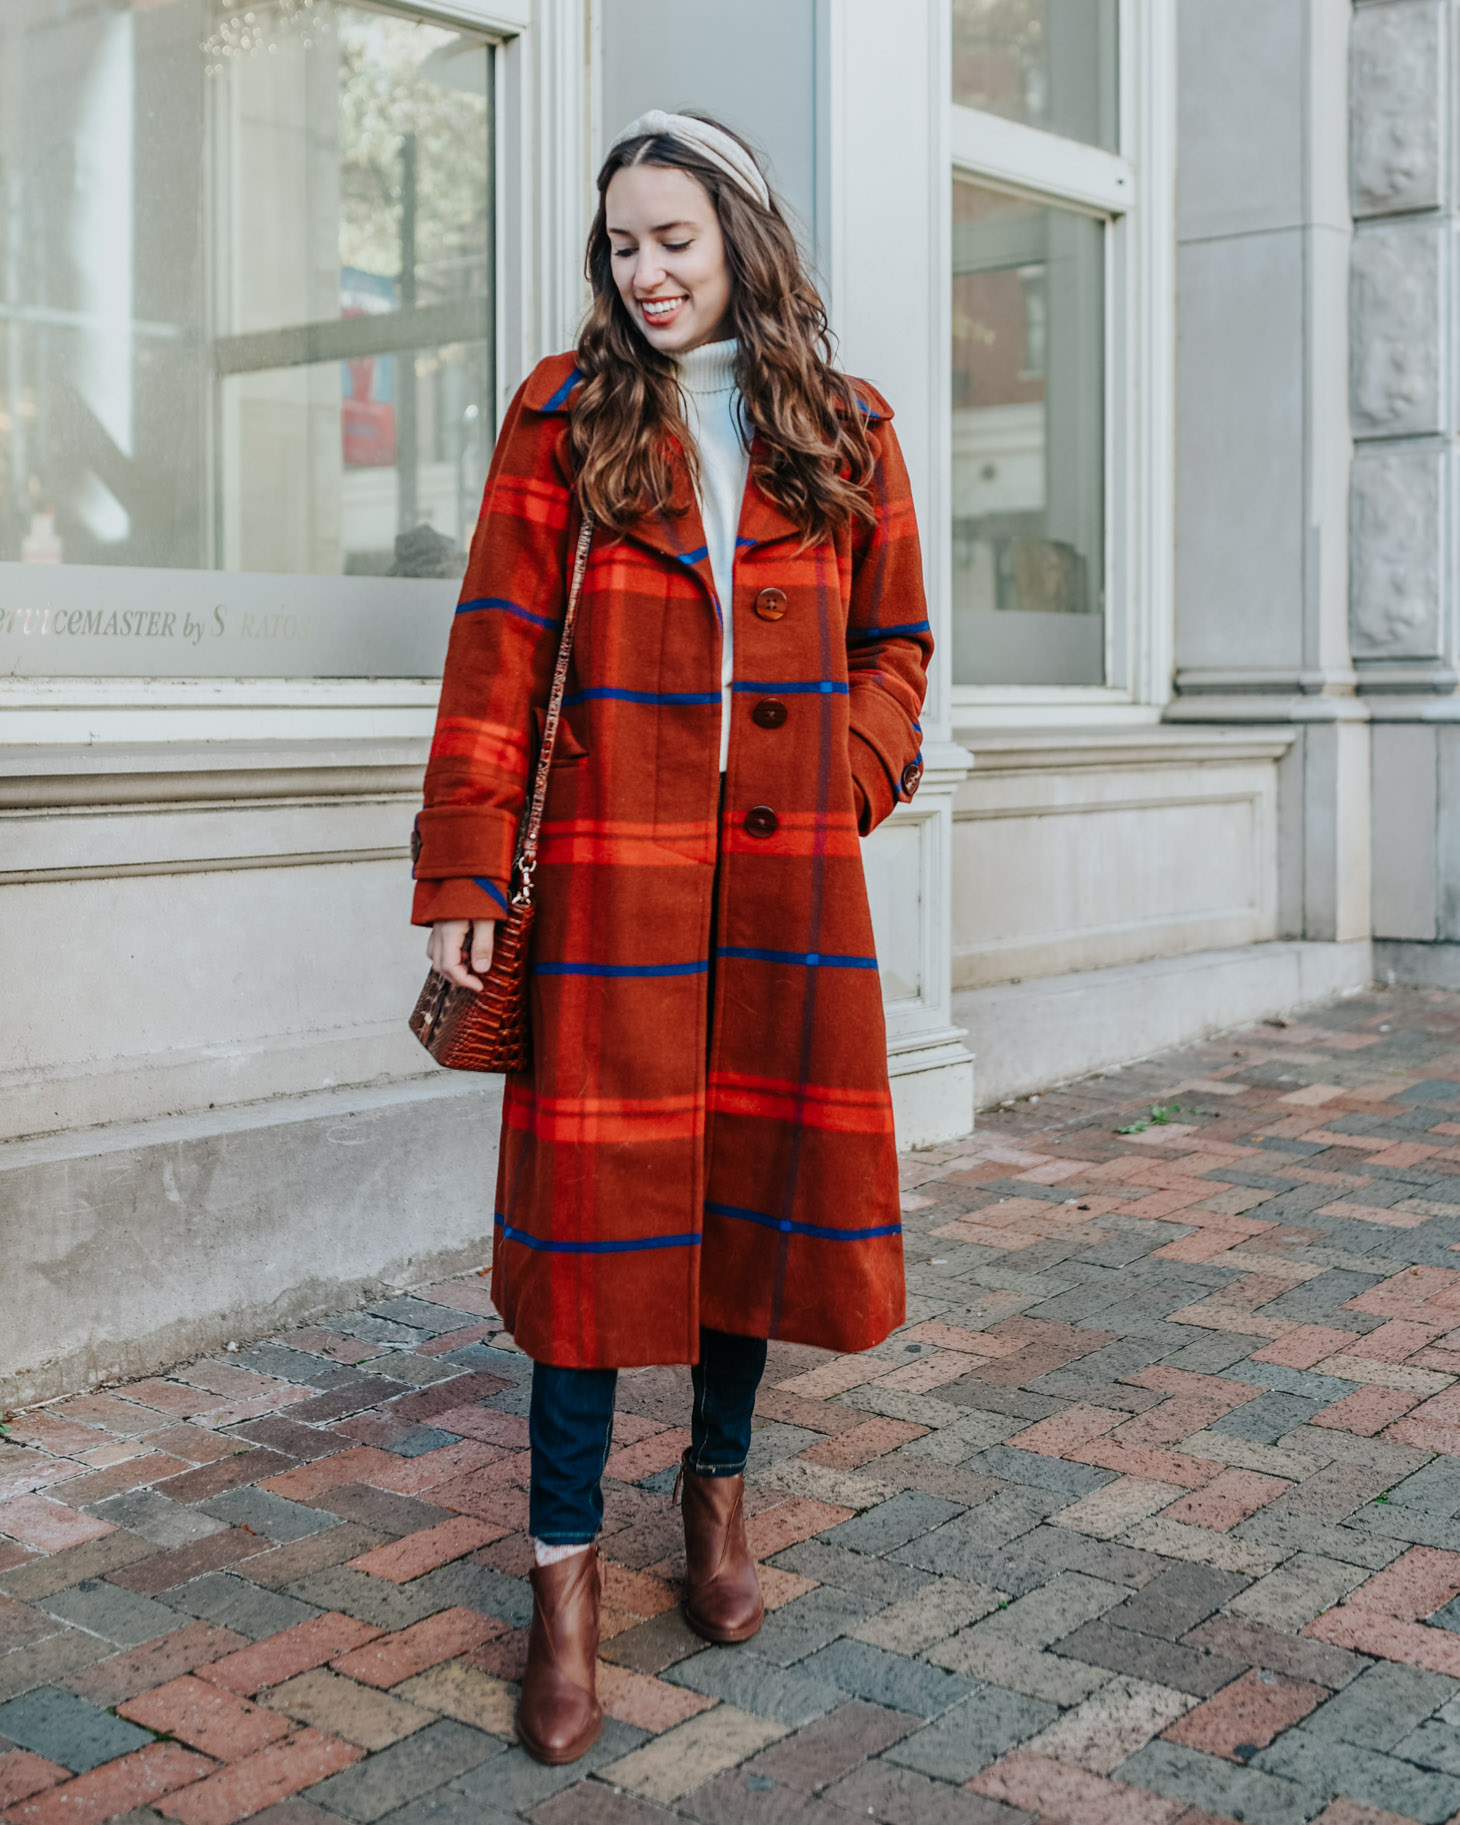 meget fint Forord klamre sig Pretty Plaid Winter Coats for Under $200 | Lone Star Looking Glass